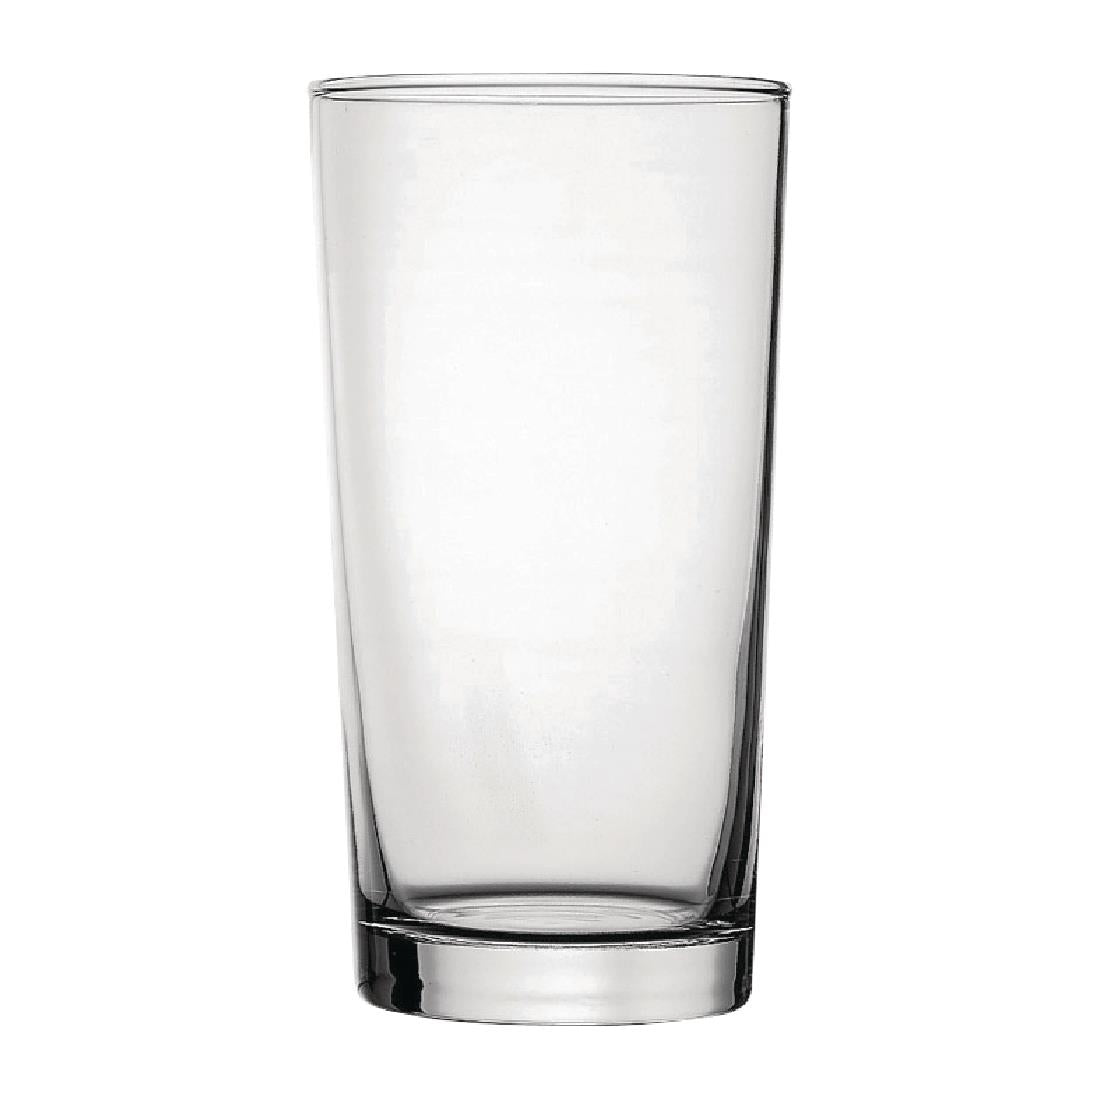 DY267 Utopia Nucleated Toughened Conical Beer Glasses 560ml CE Marked (Pack of 48)